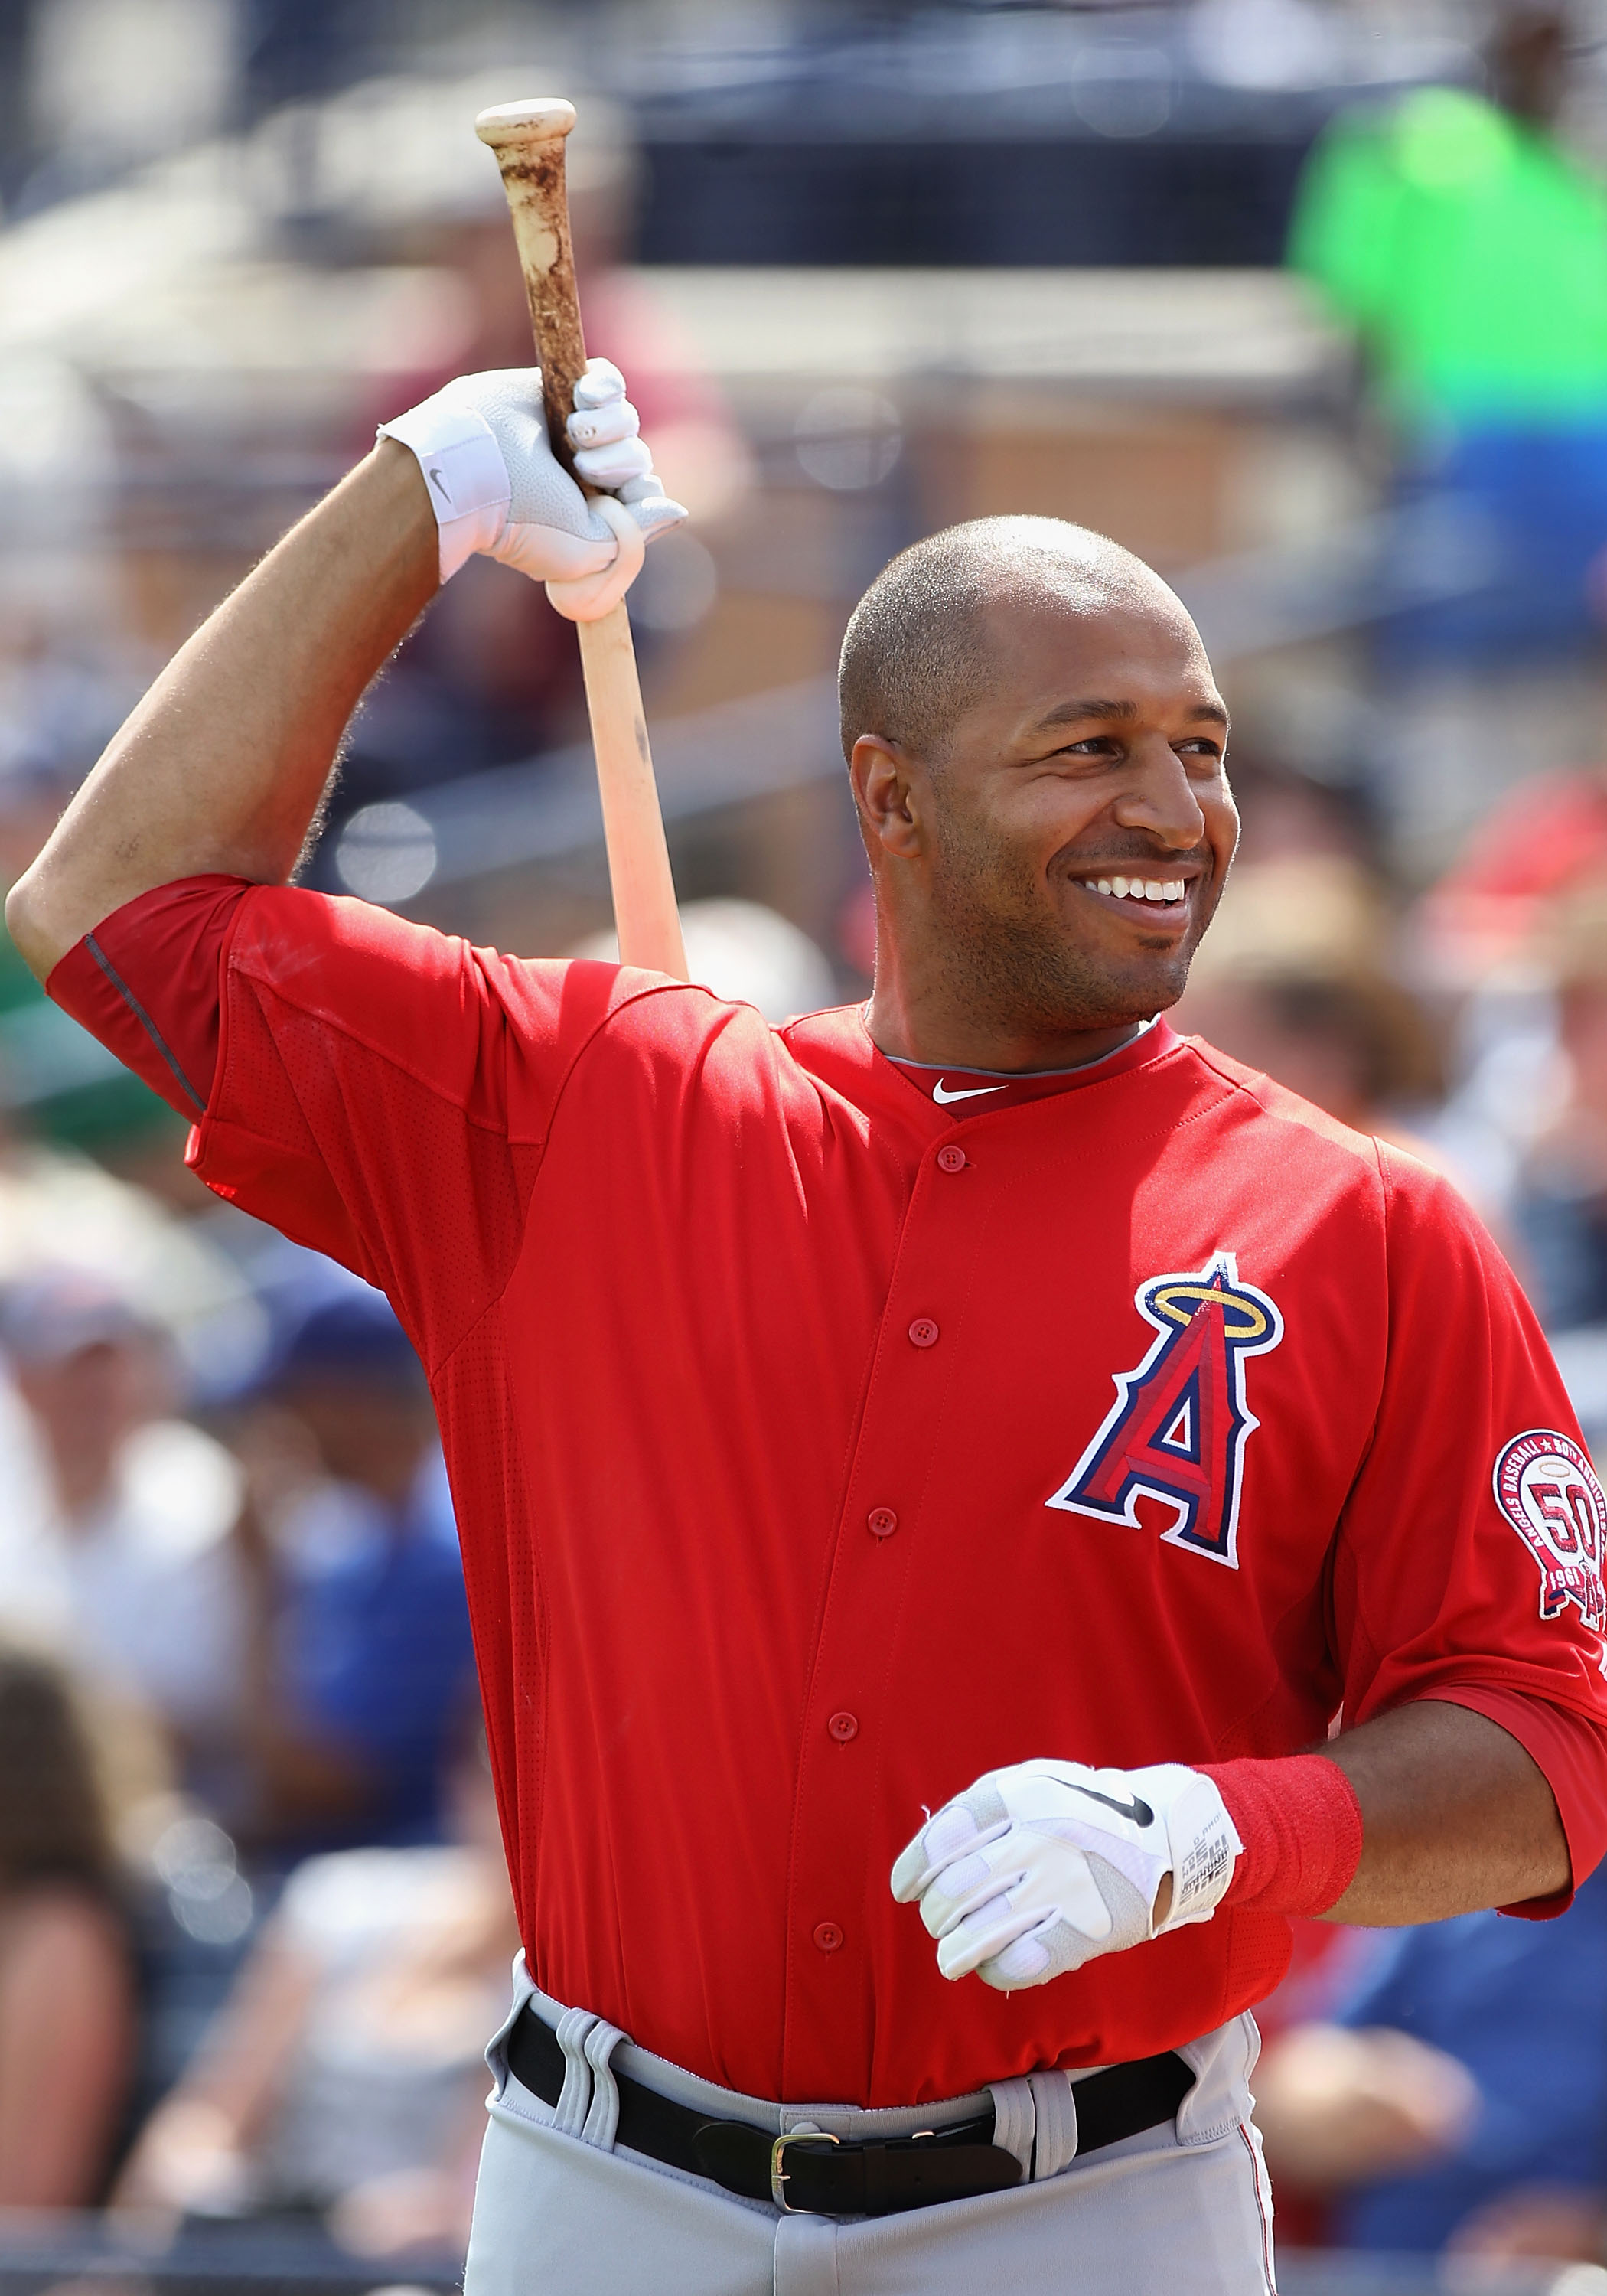 PEORIA, AZ - MARCH 15:  Vernon Wells #10 of the Los Angeles Angels of Anaheim warms up on deck during the spring training game against the San Diego Padres at Peoria Stadium on March 15, 2011 in Peoria, Arizona.  (Photo by Christian Petersen/Getty Images)